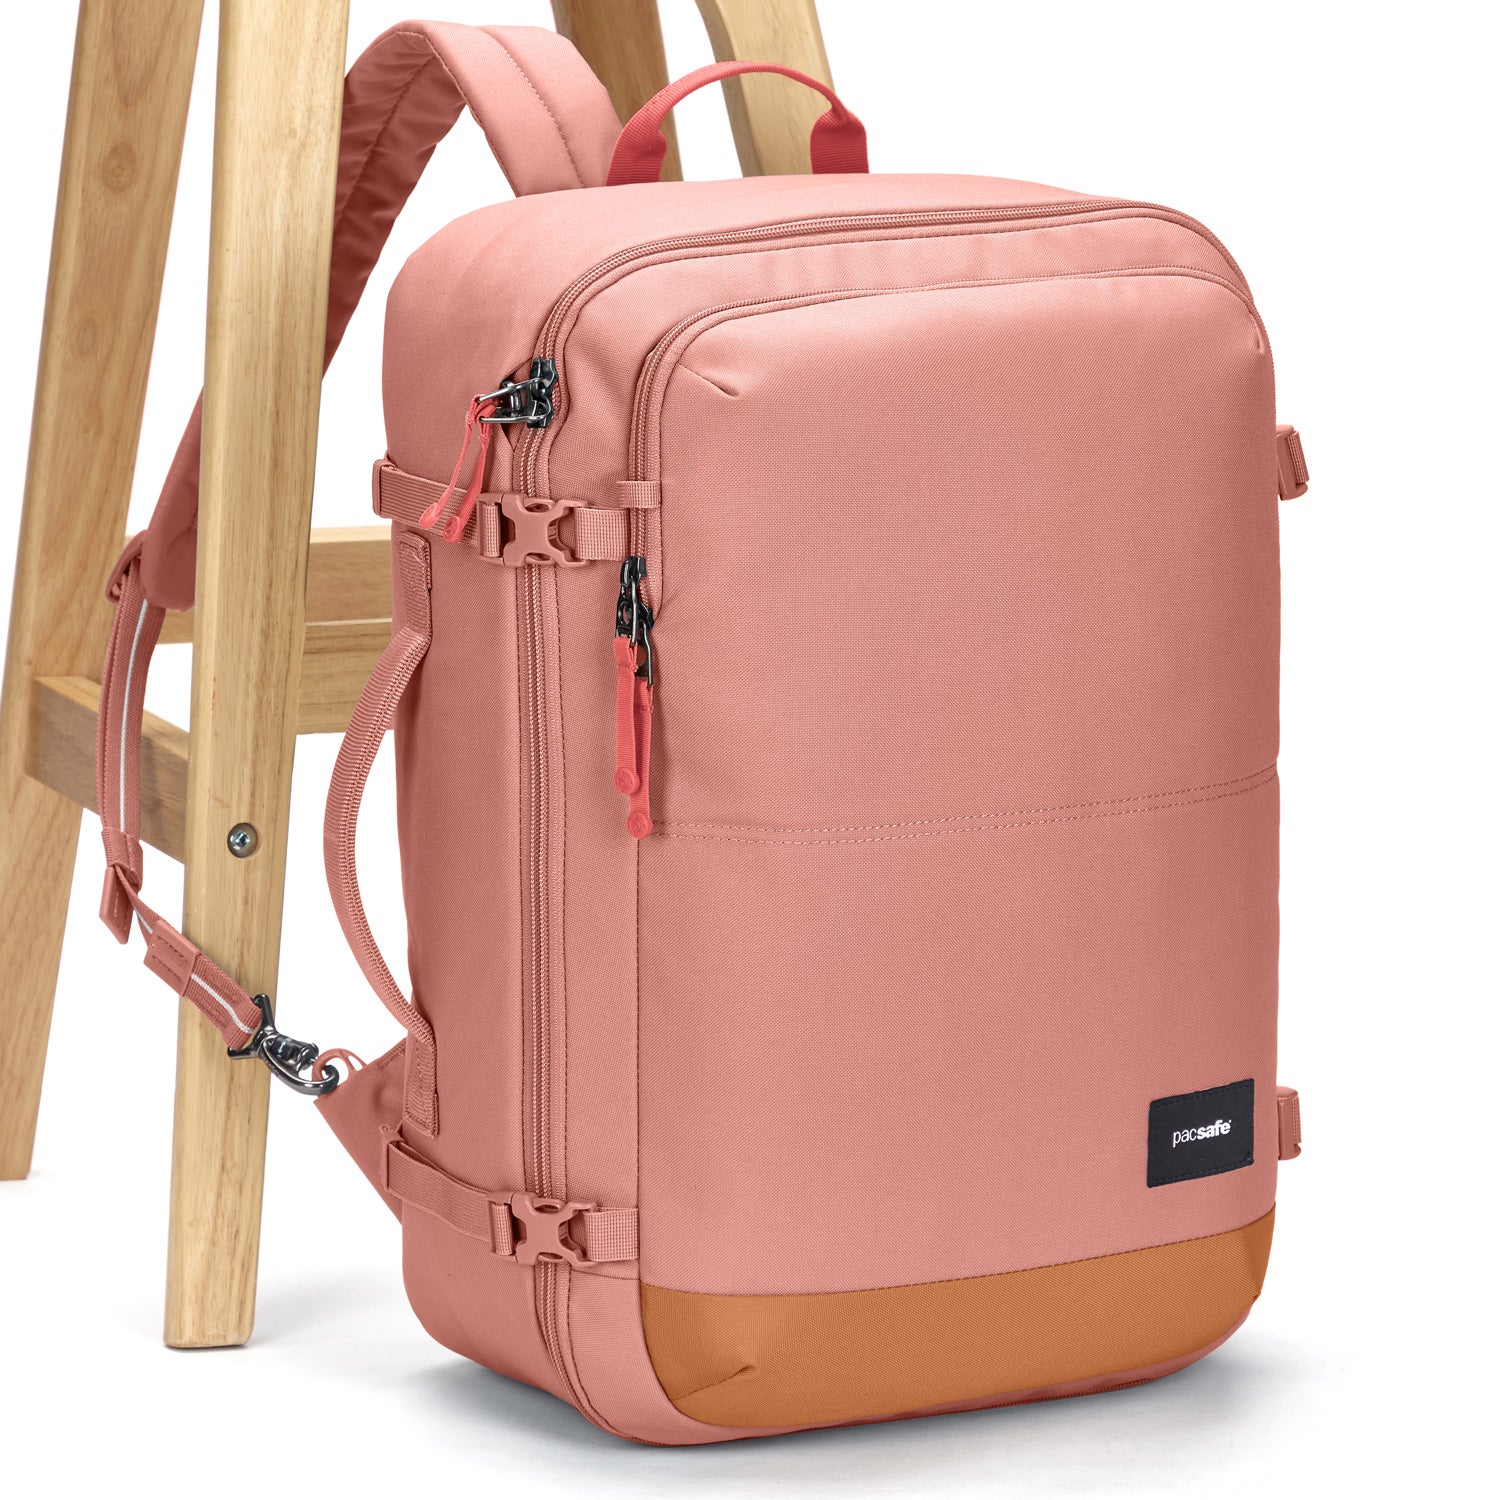 Pacsafe - Pacsafe GO Carry-on Backpack 34L - Rose-5